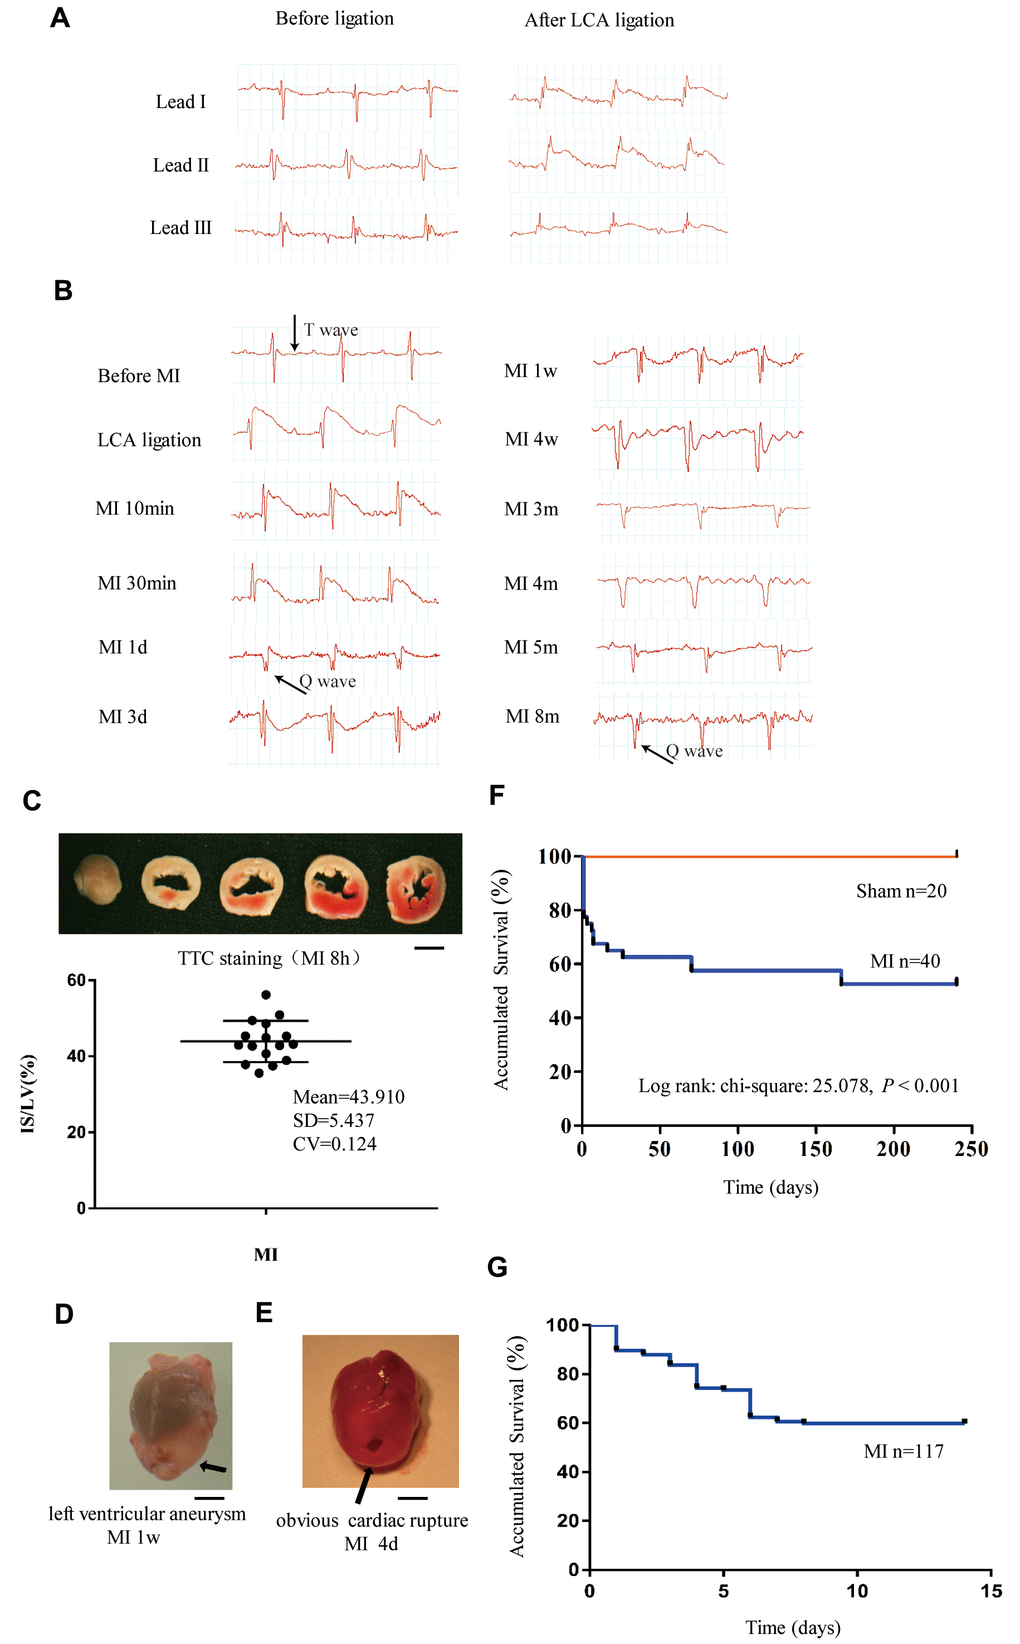 Monitoring of long-term MI mouse model for 8 months. (A) Limb leads I, II and III of electrocardiogram (ECG) reliably reflect the acute ischemia induced by left coronary ligation in C57BL/6 mice. (B) Lead II ECG can reflect different stages of myocardial infarction (MI) for a time period of 8 months. (C) Triphenyl tetrazolium chloride (TTC)-stained sections of heart in mice with MI for 8 h; the infarct size (IS)/ left ventricle (LV) was approximately 44% in the MI groups. (D) Representative left ventricular aneurysm formed 1 week after MI; (E) Example necropsy images of a dead mouse showing obvious rupture in the left ventricle free wall. (F): Kaplan–Meier survival analysis of mice subjected to MI or sham operation for 8 months. (G) Kaplan–Meier survival analysis of mice subjected to MI or sham operation for 14 days, n = 114 in MI group; Scale bar =2 mm for panel (C, D and E).